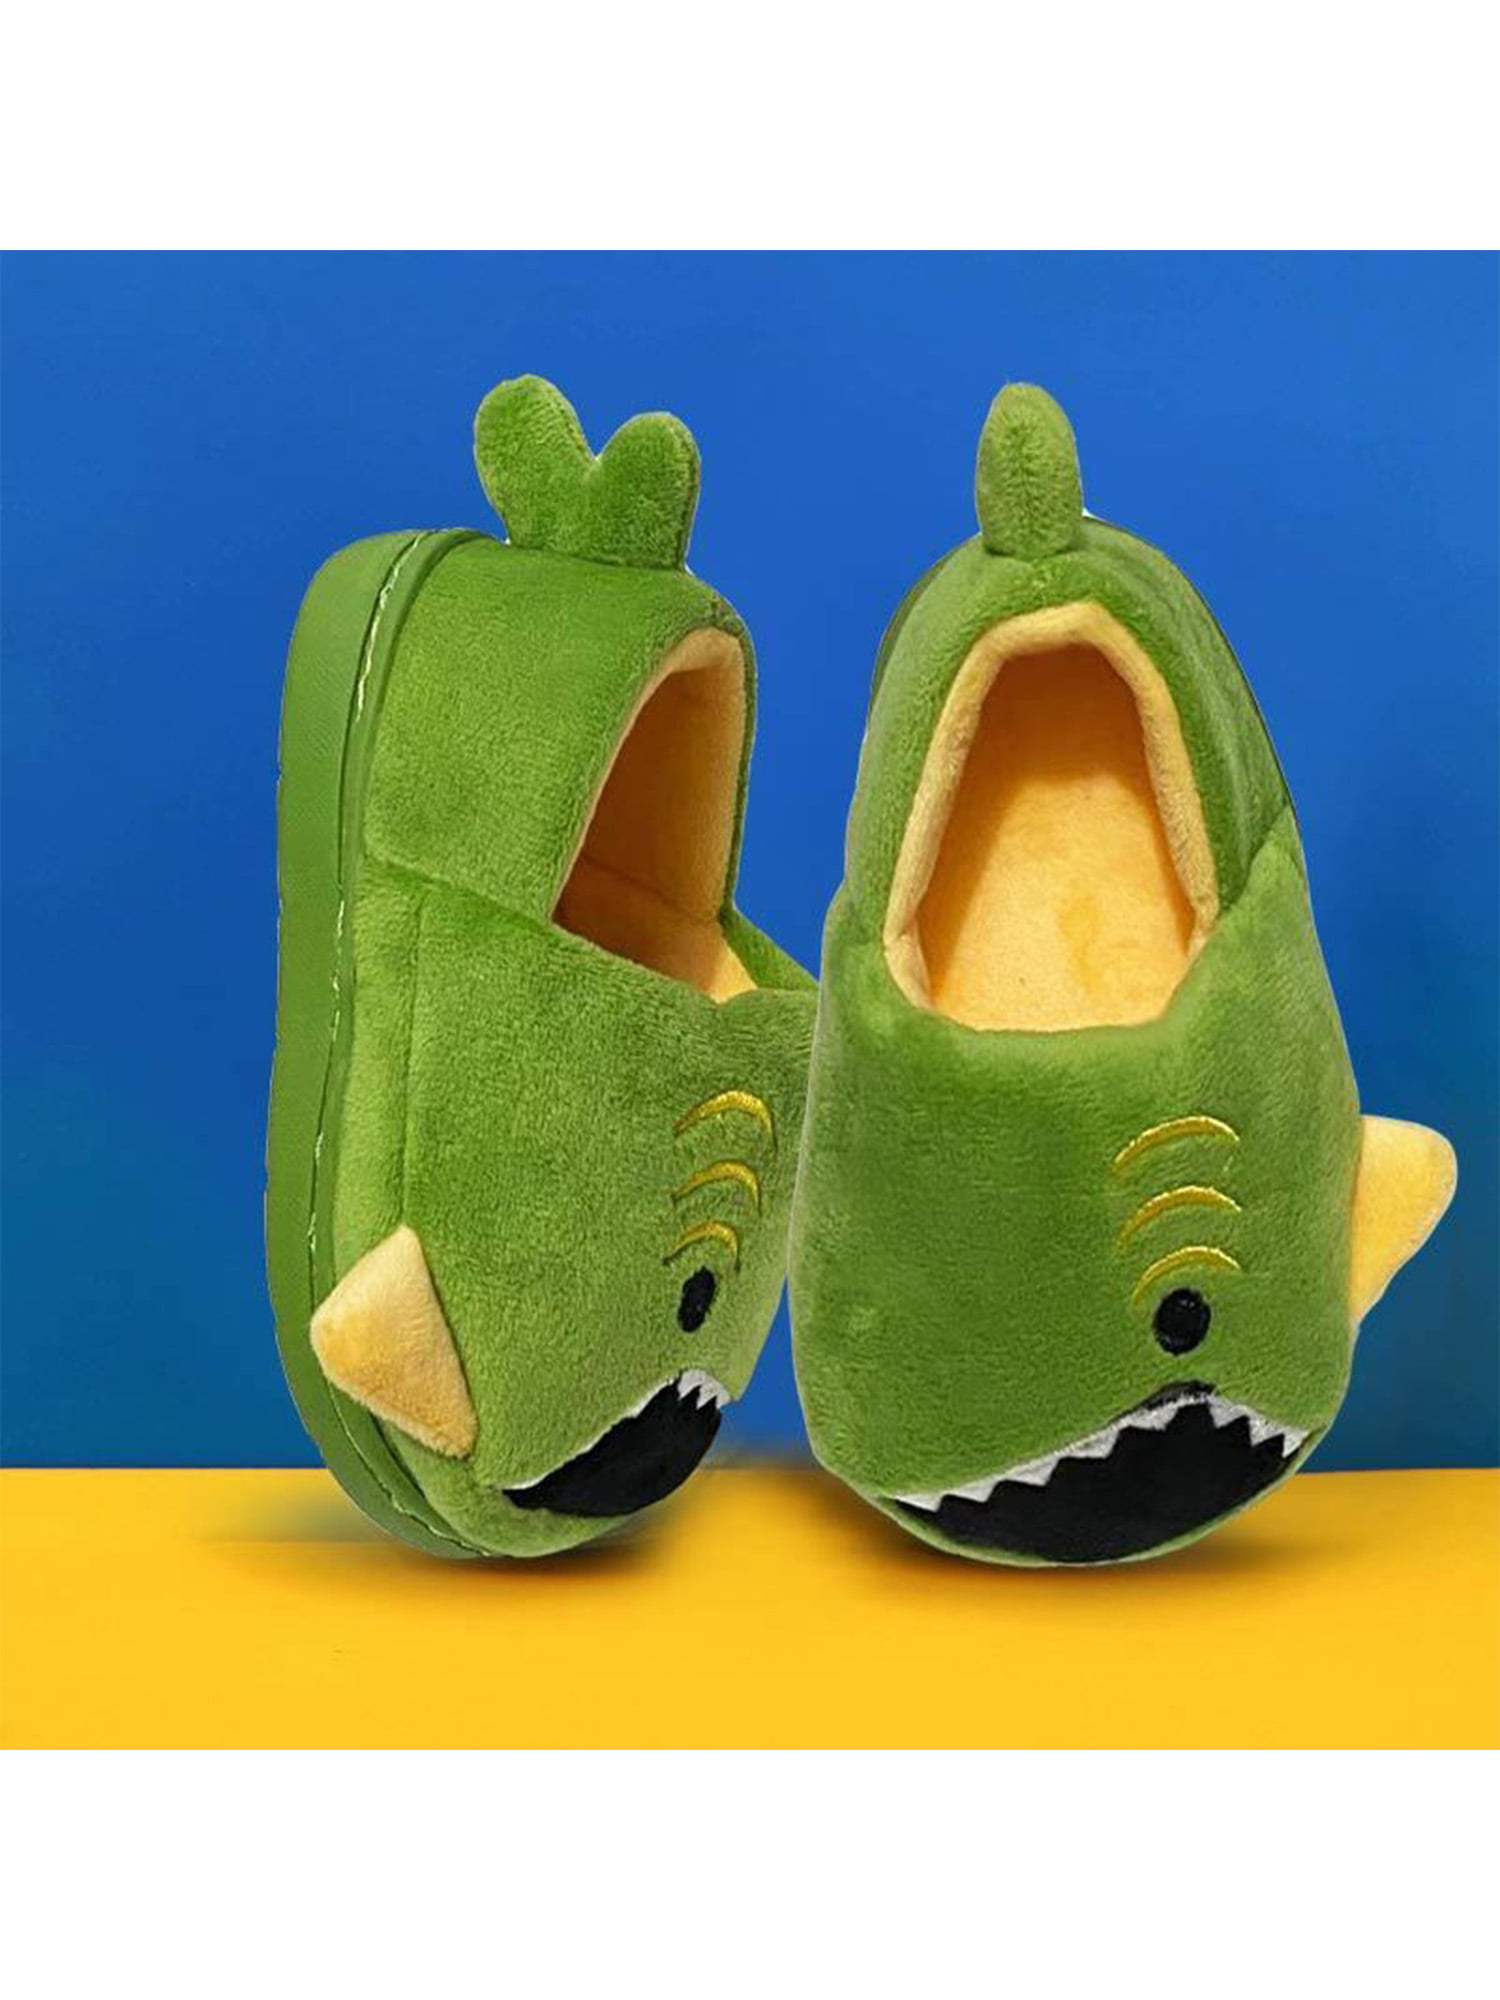 MARITONY Toddler Slippers Girls Boys House Fuzzy Slippers Cute Kids Winter Indoor Home Shoes 